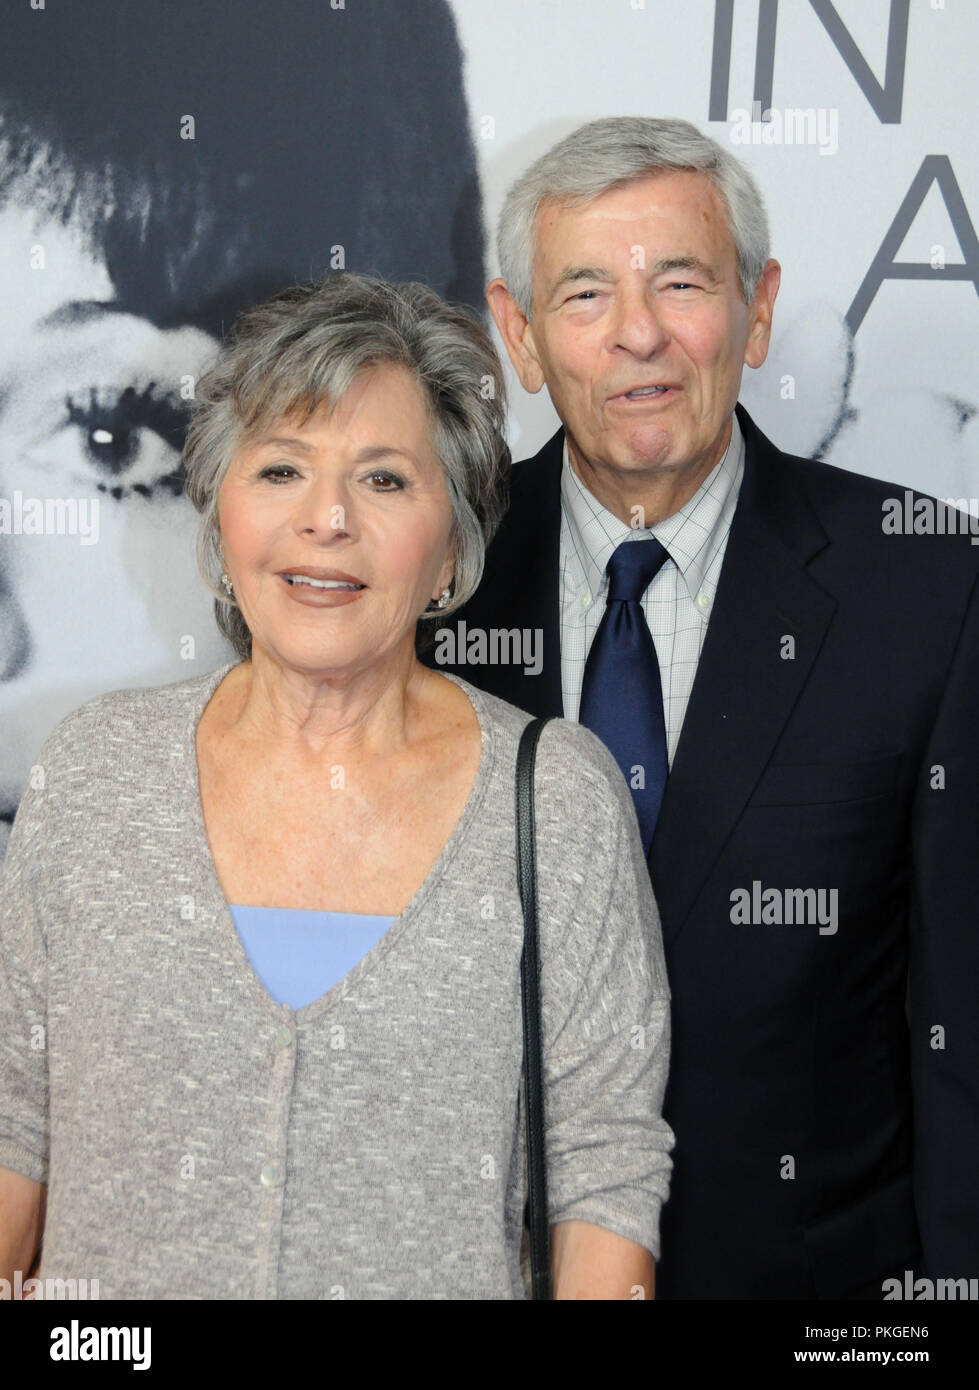 Los Angeles, USA. 13th Sep 2018. Former US Senator Barbara Boxer and husband Stewart Boxer attend HBO Presents The Los Angeles Premiere of the HBO Documentary Film 'Jane Fonda In Five Acts' on September 13, 2018 at Hammer Museum in Los Angeles, California. Photo by Barry King/Alamy Live News Stock Photo